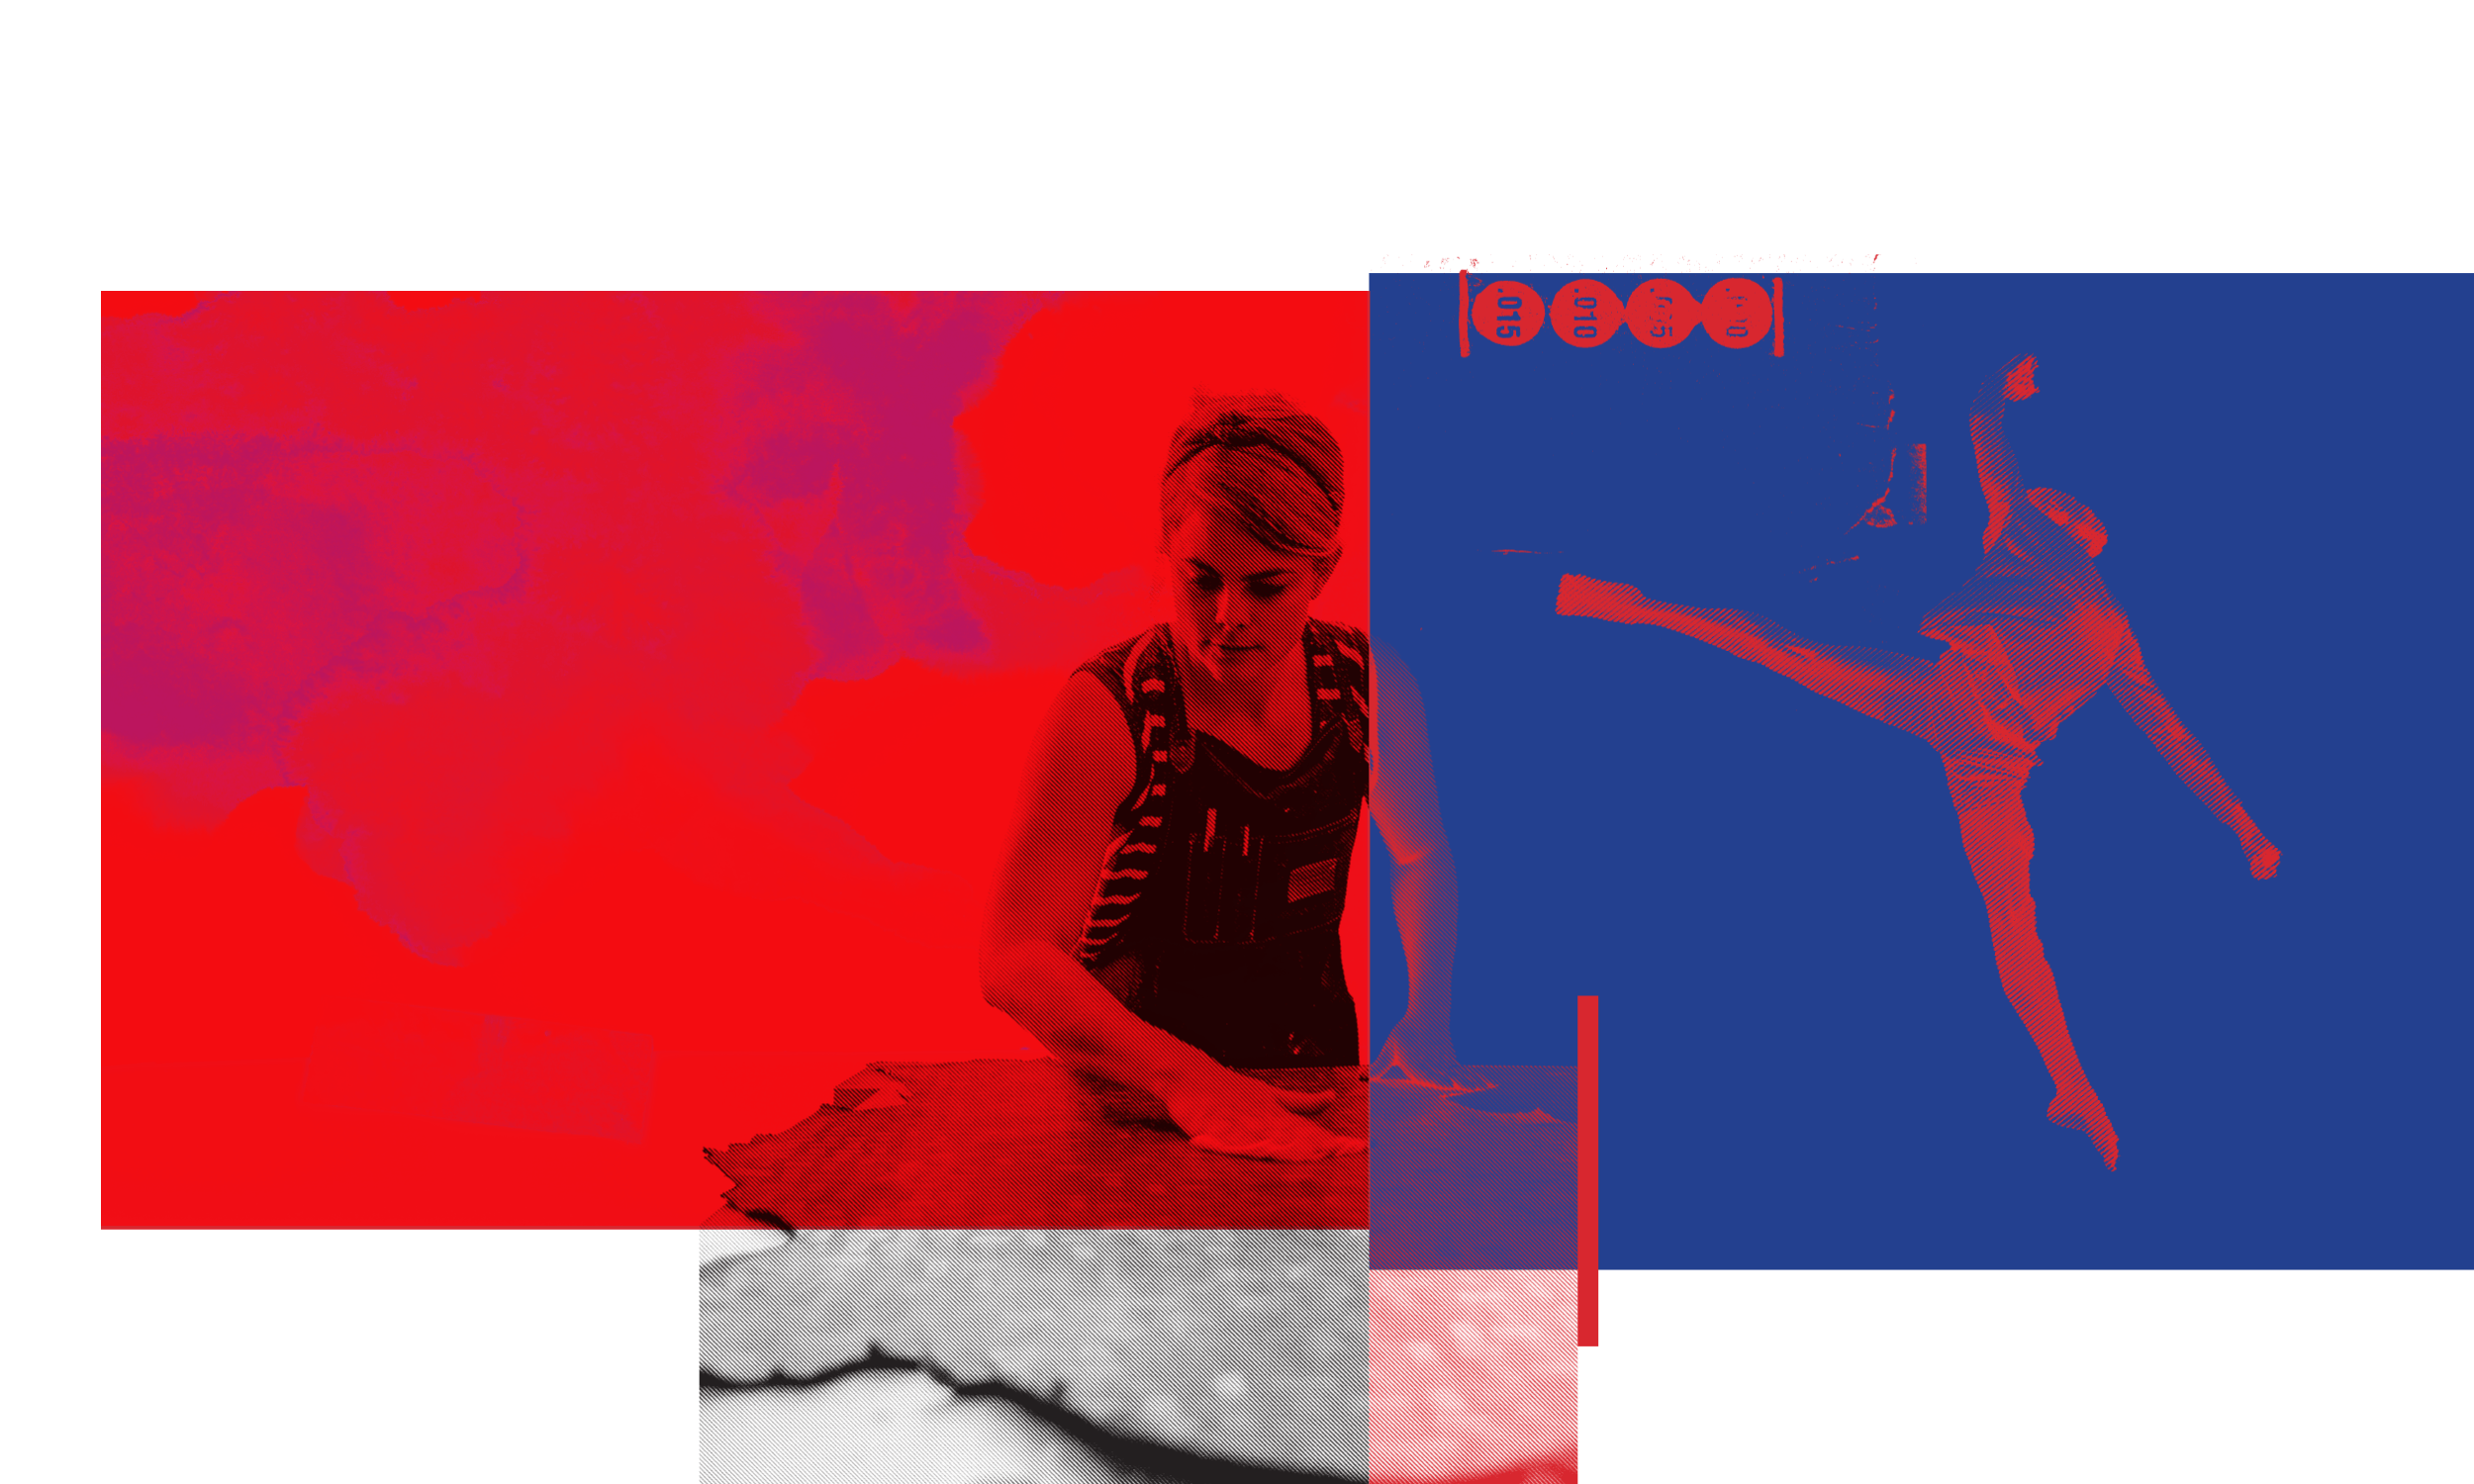 A graphic image of a student working on printmaking next to a dancer leaping into the air. Both images are treated with red and blue hues.